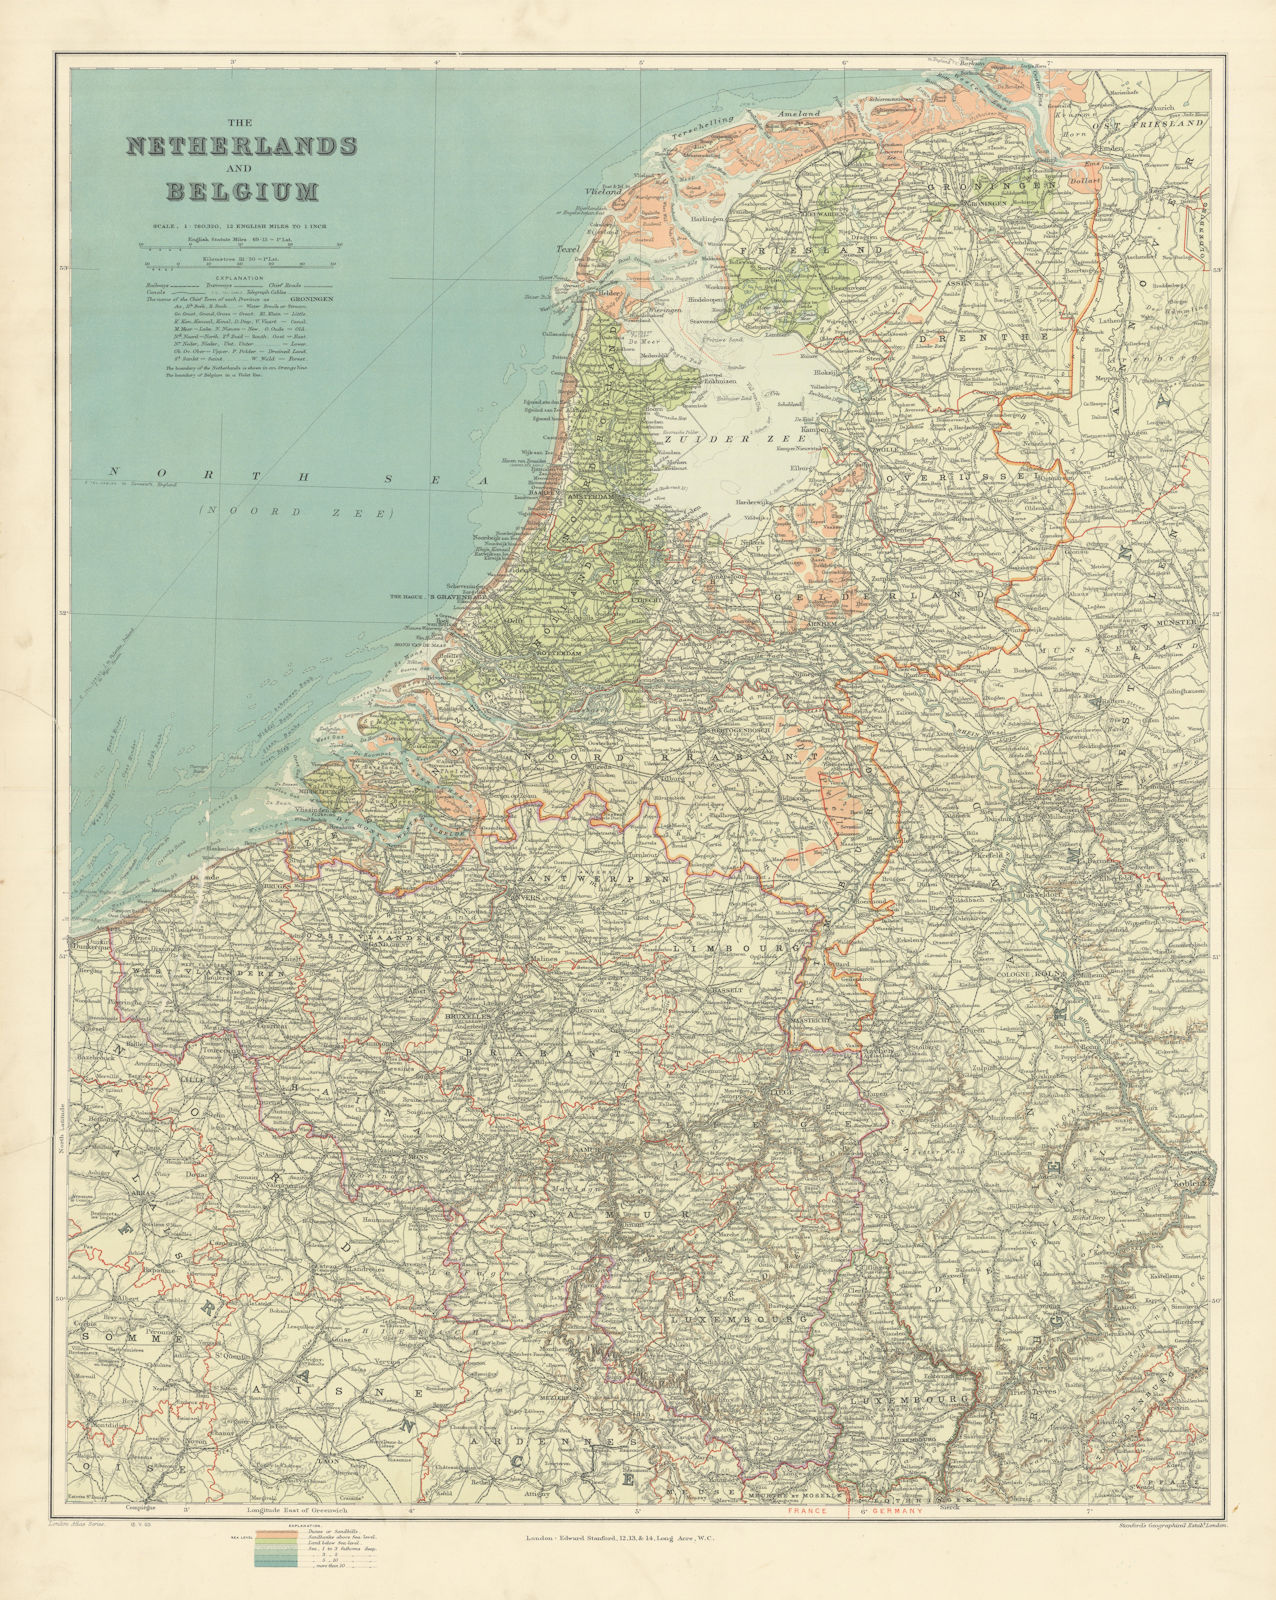 Netherlands & Belgium. Benelux. Projected Great Dyke. 68x54cm. STANFORD 1904 map